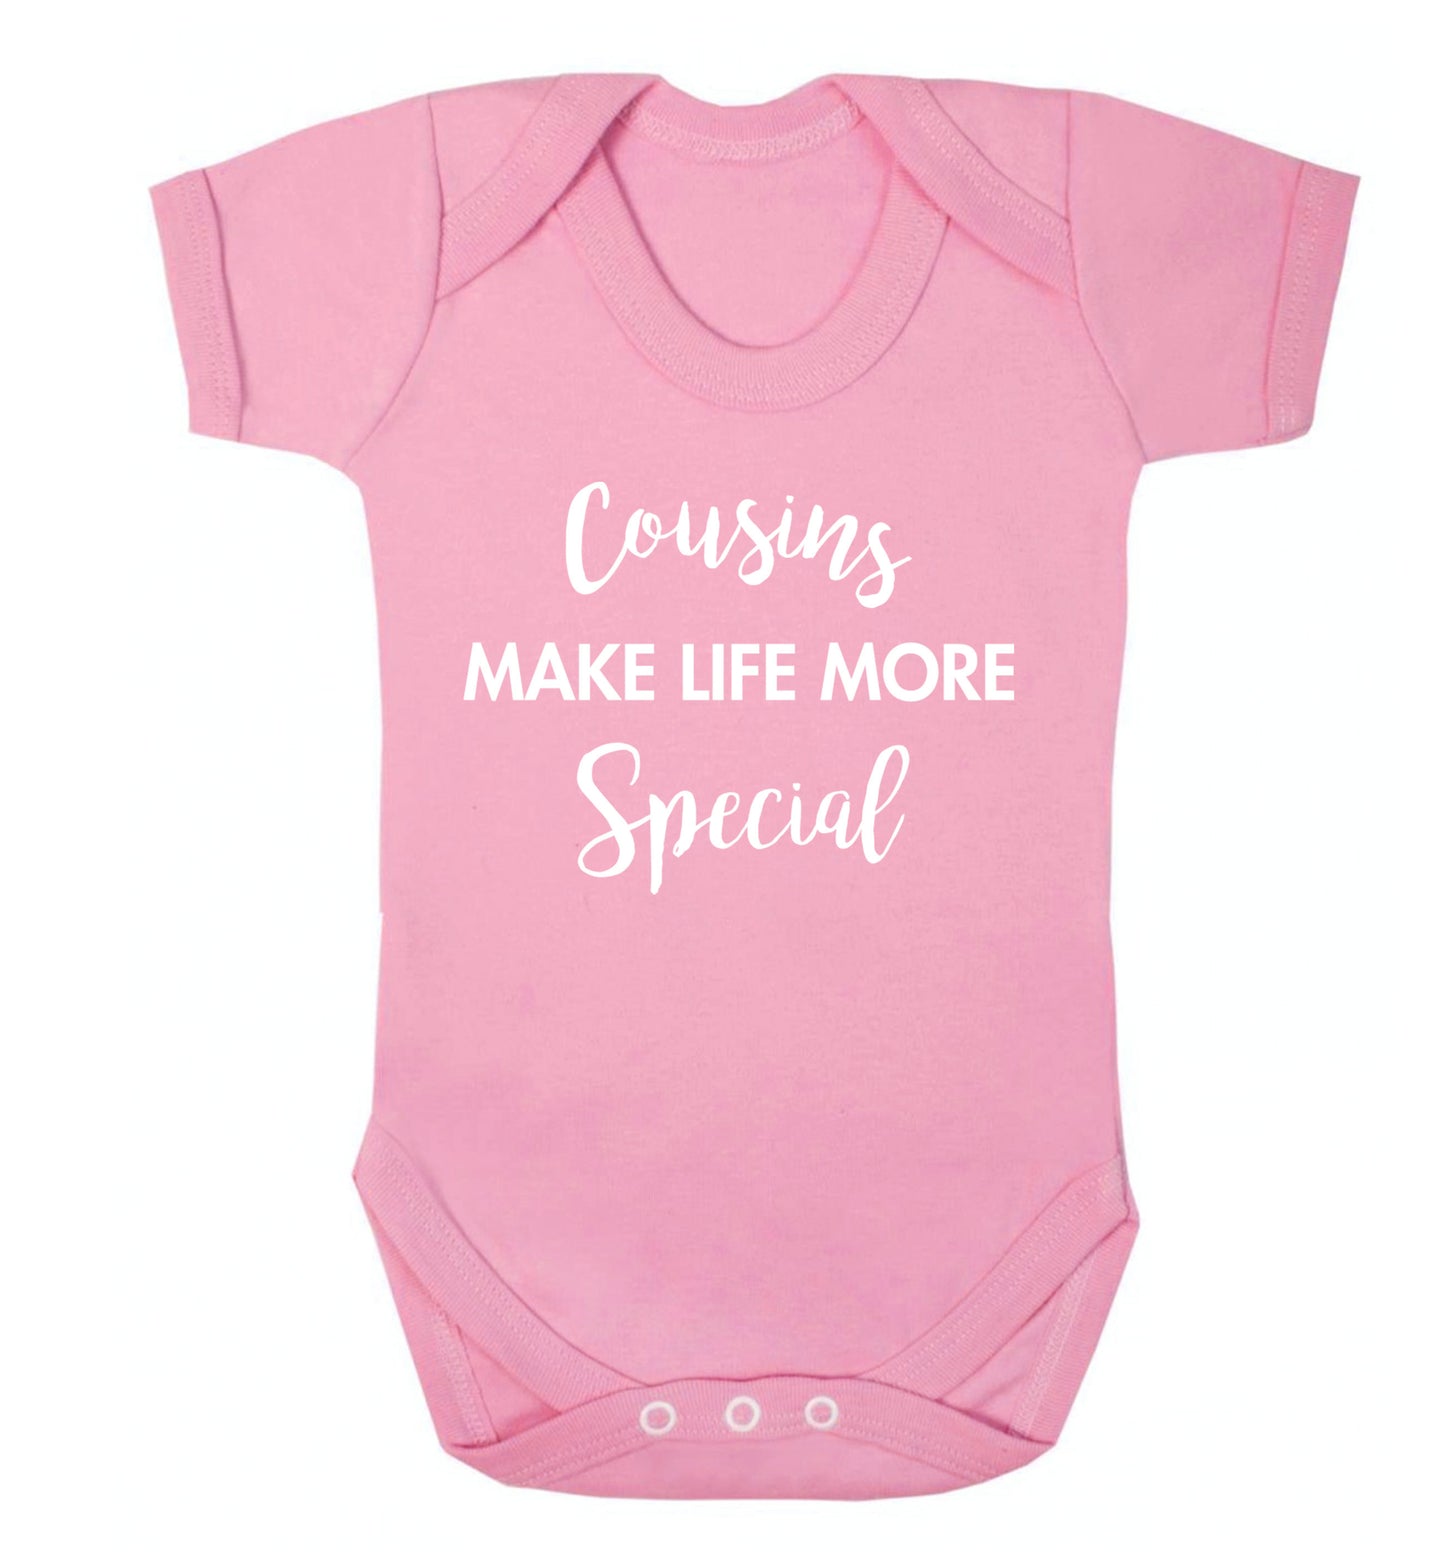 Cousins make life more special Baby Vest pale pink 18-24 months